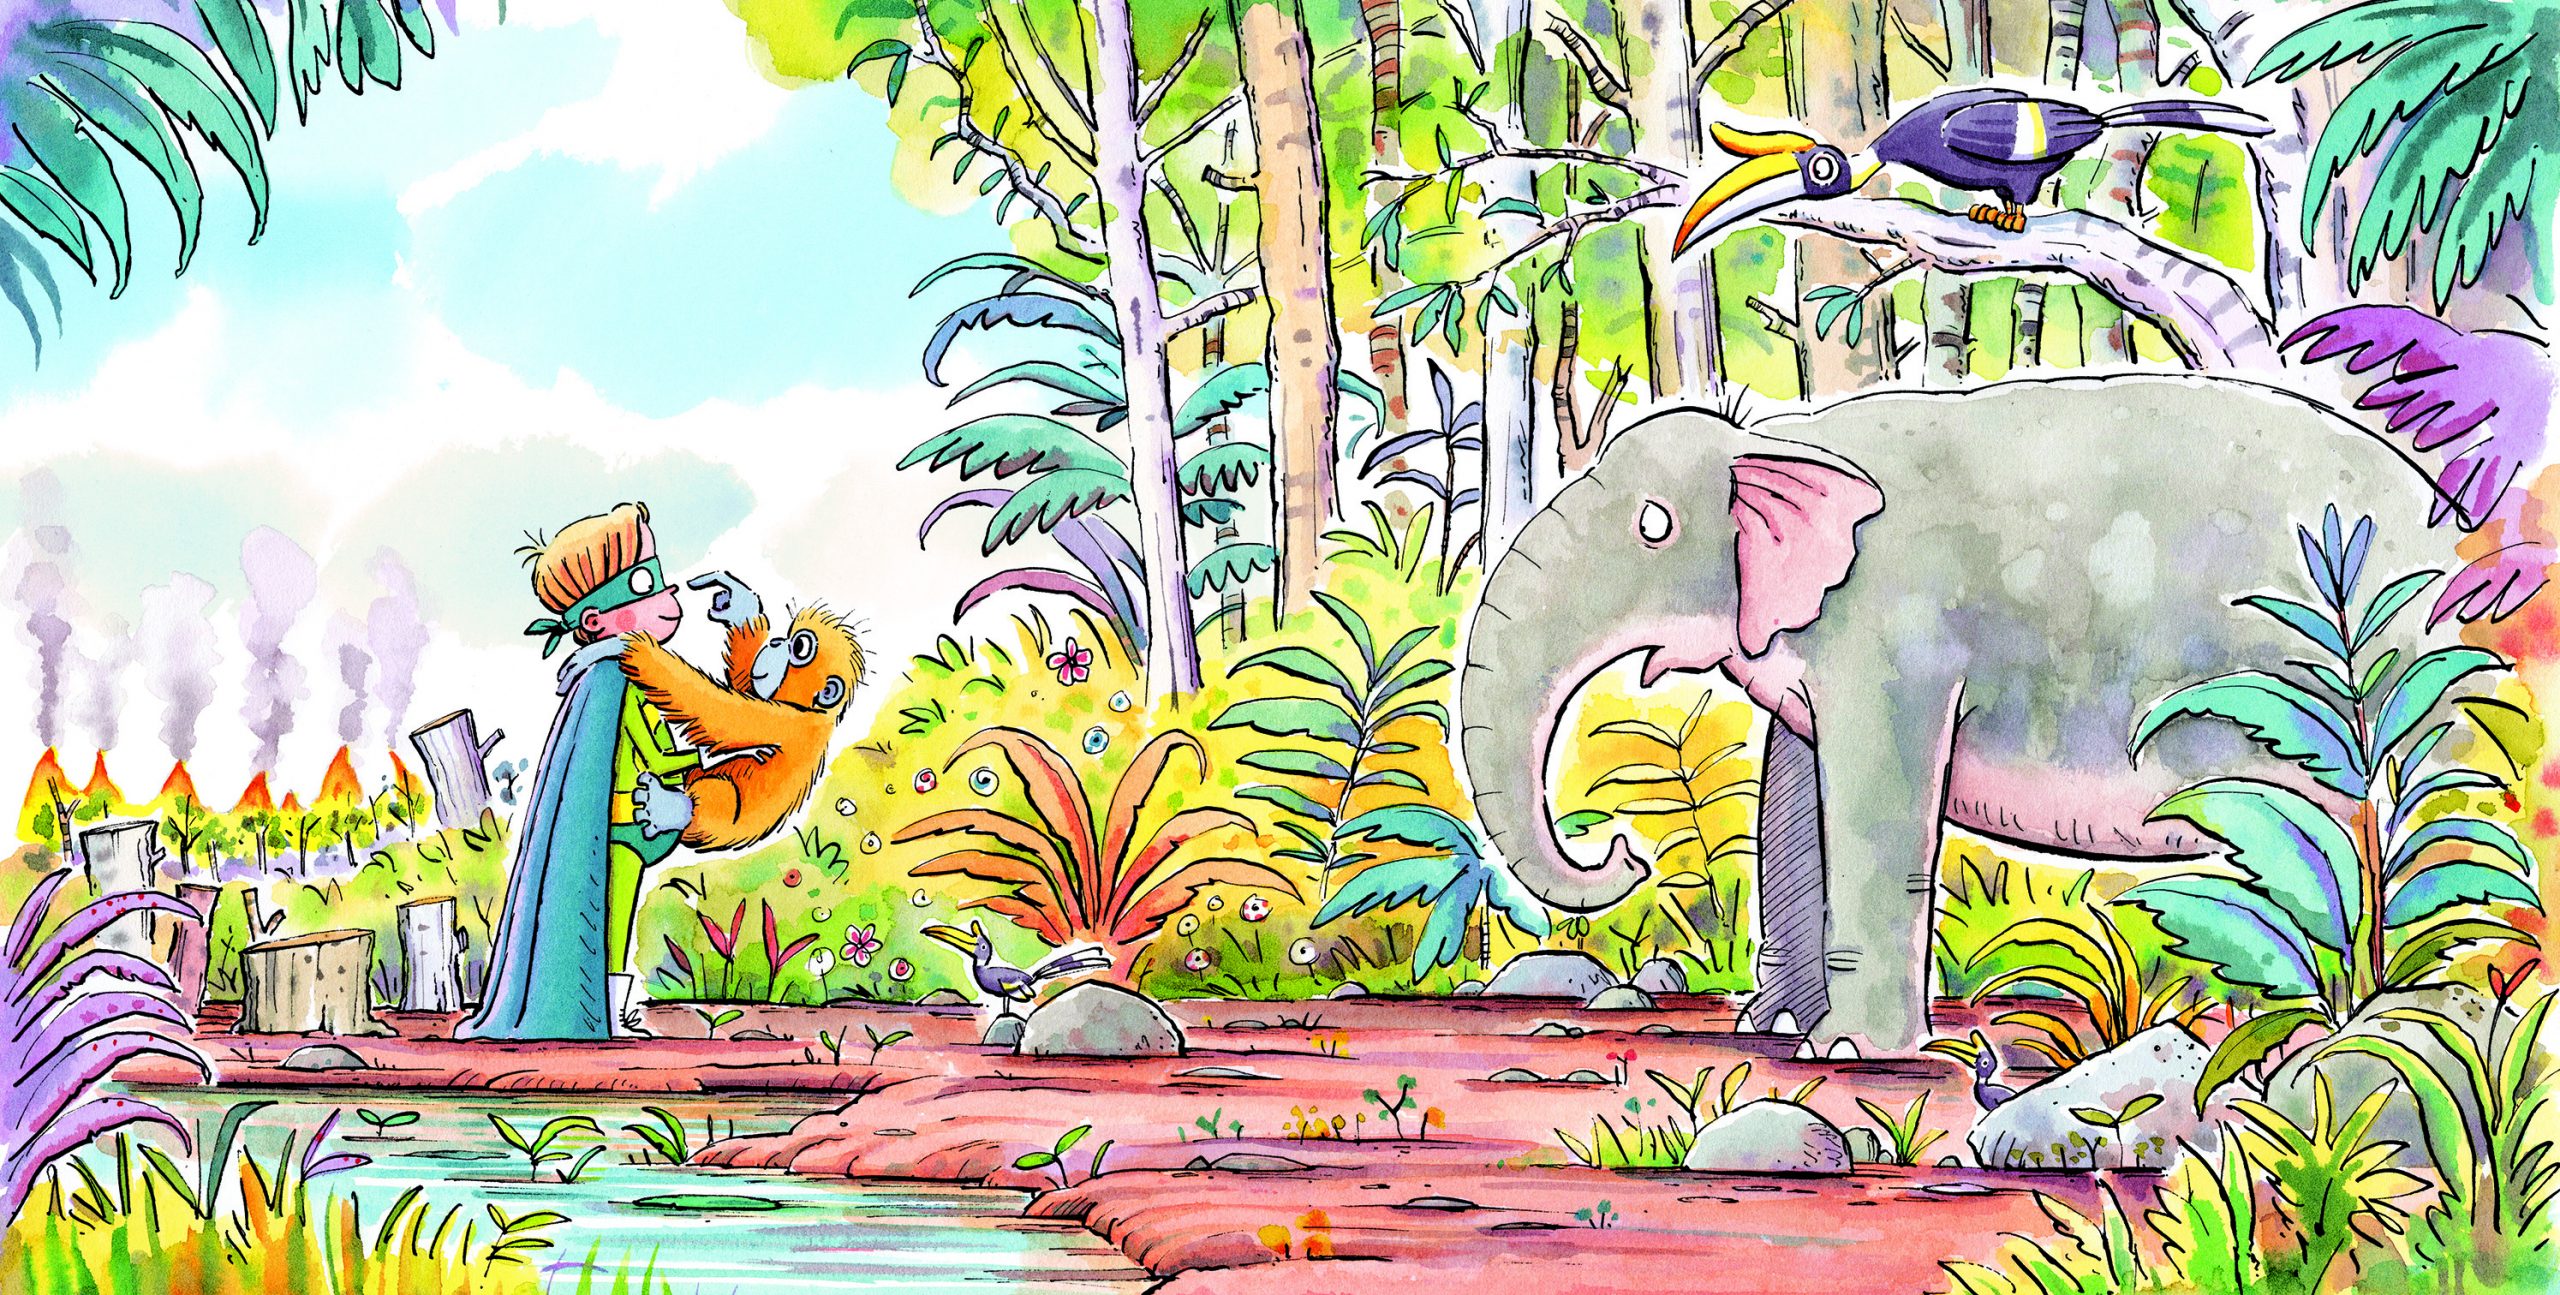 LitLinks: Show kids how to protect ancient rainforests, endangered species